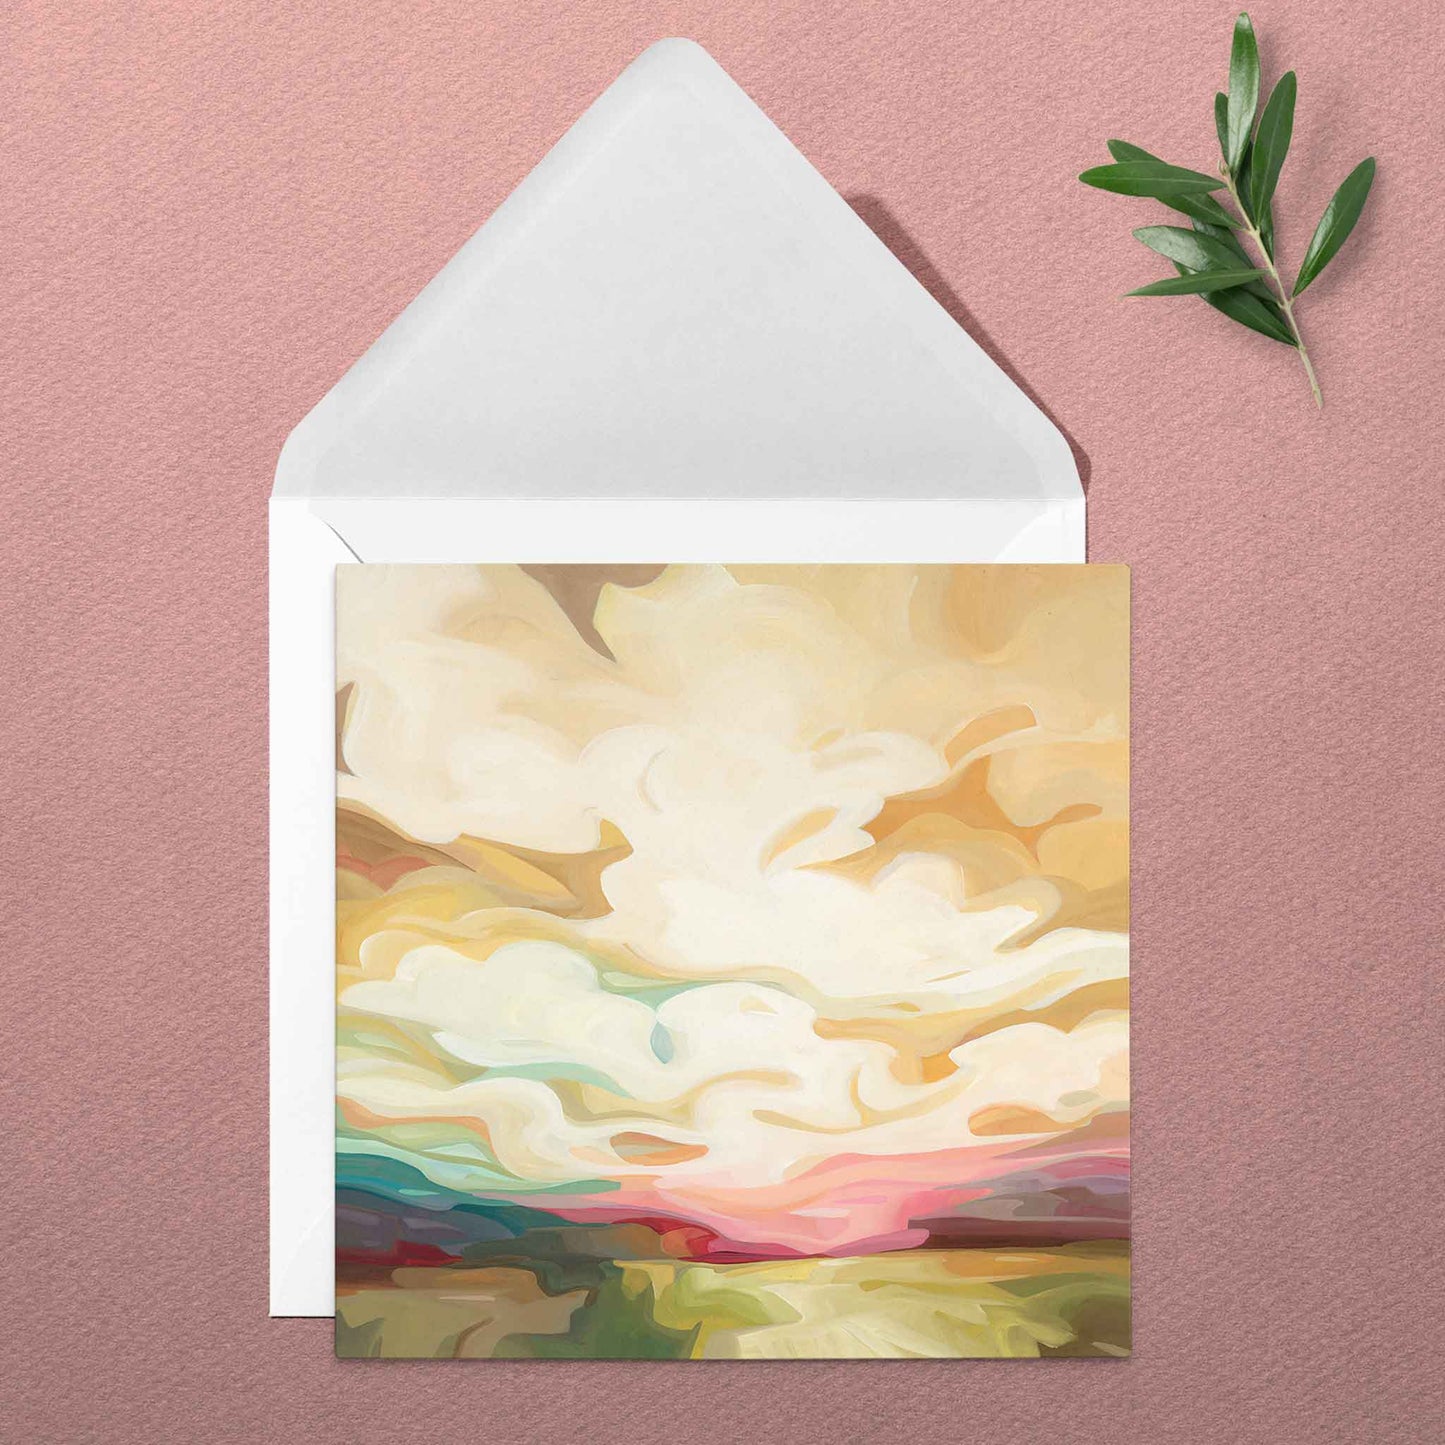 UK fine art greeting card with golden hour painting